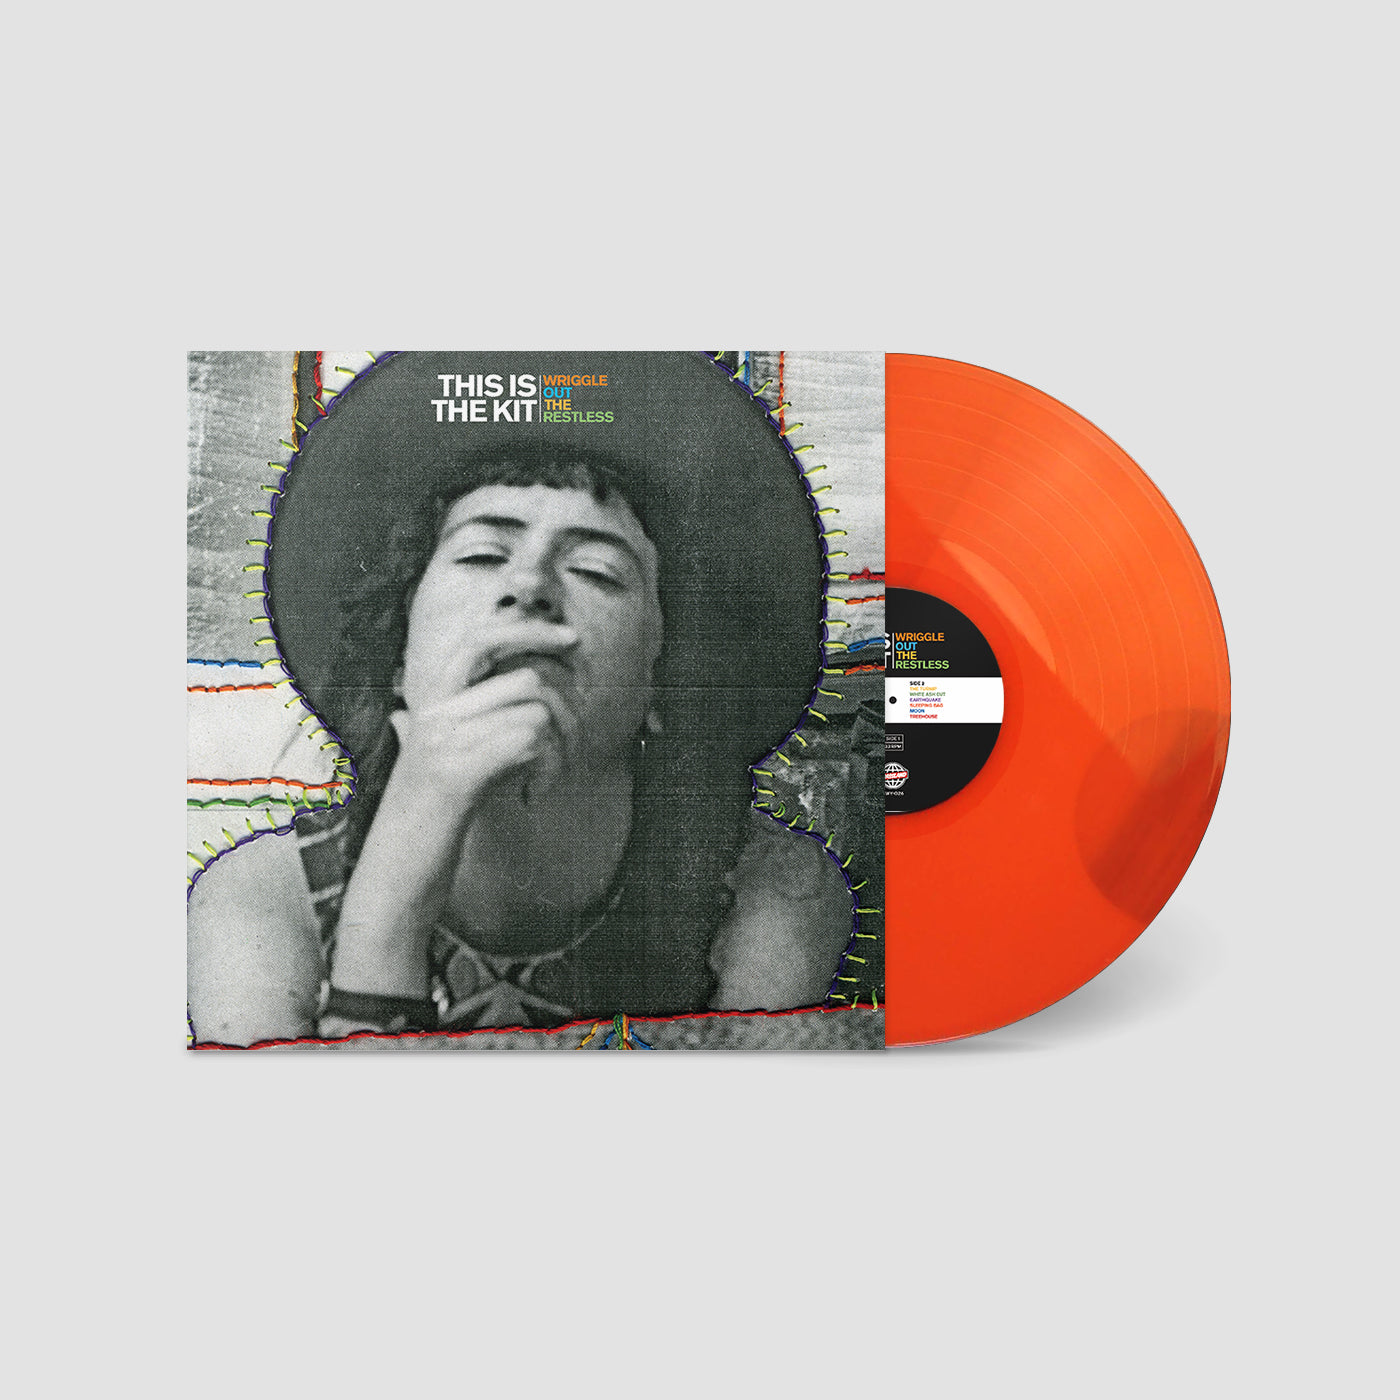 This Is The Kit - Wriggle Out the Restless: Limited Transparent Orange Vinyl LP